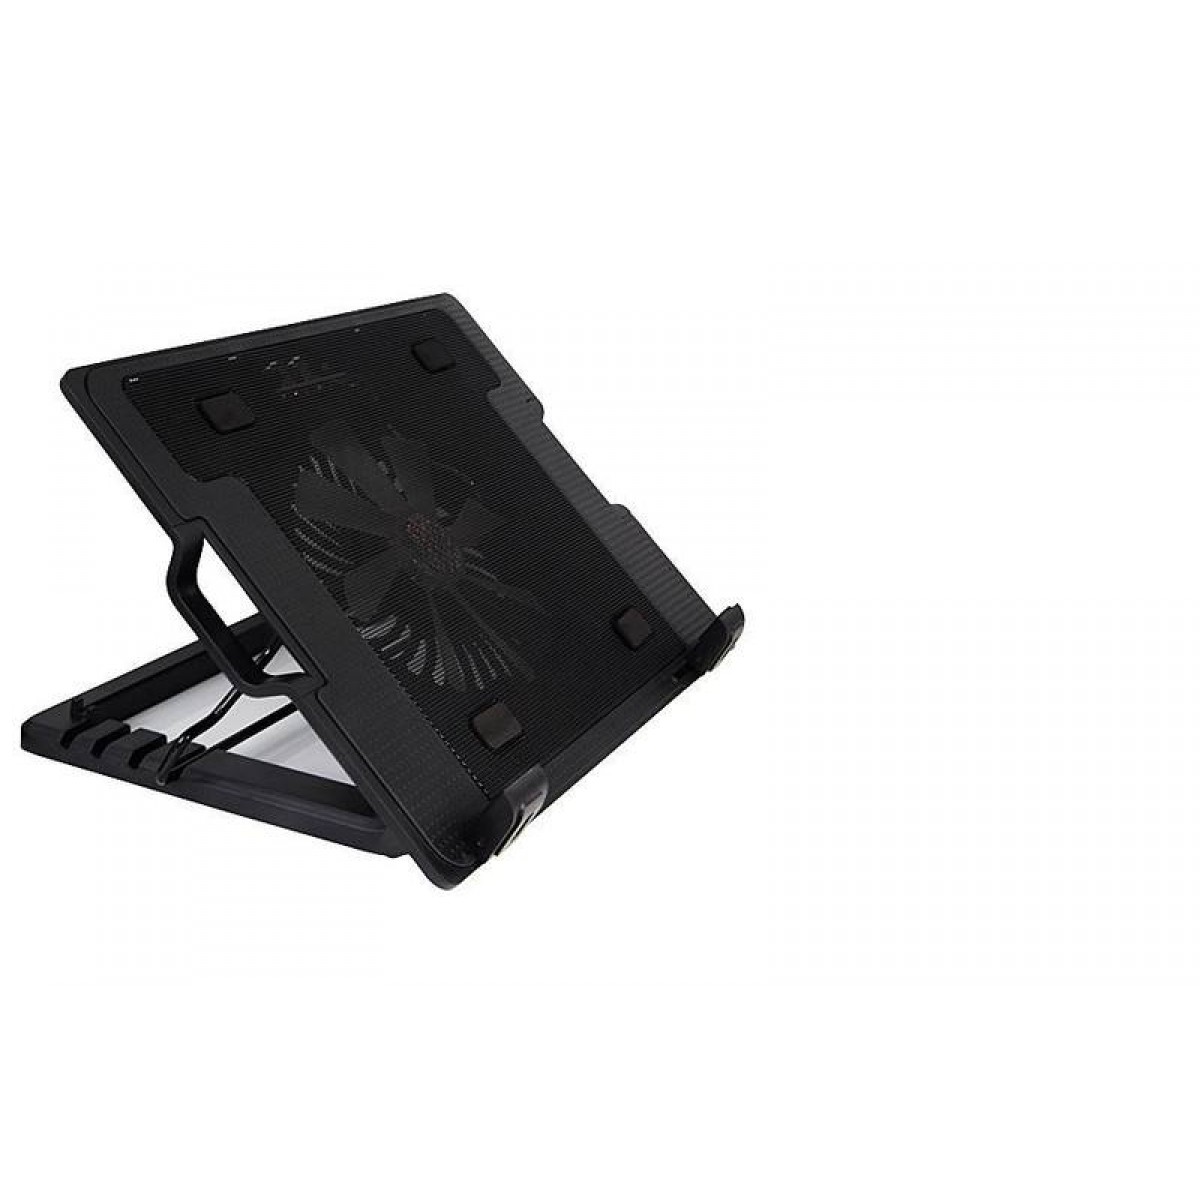 Gaming Laptop Cooler Notebook Stand and Cooling Pad Adjustable Angle